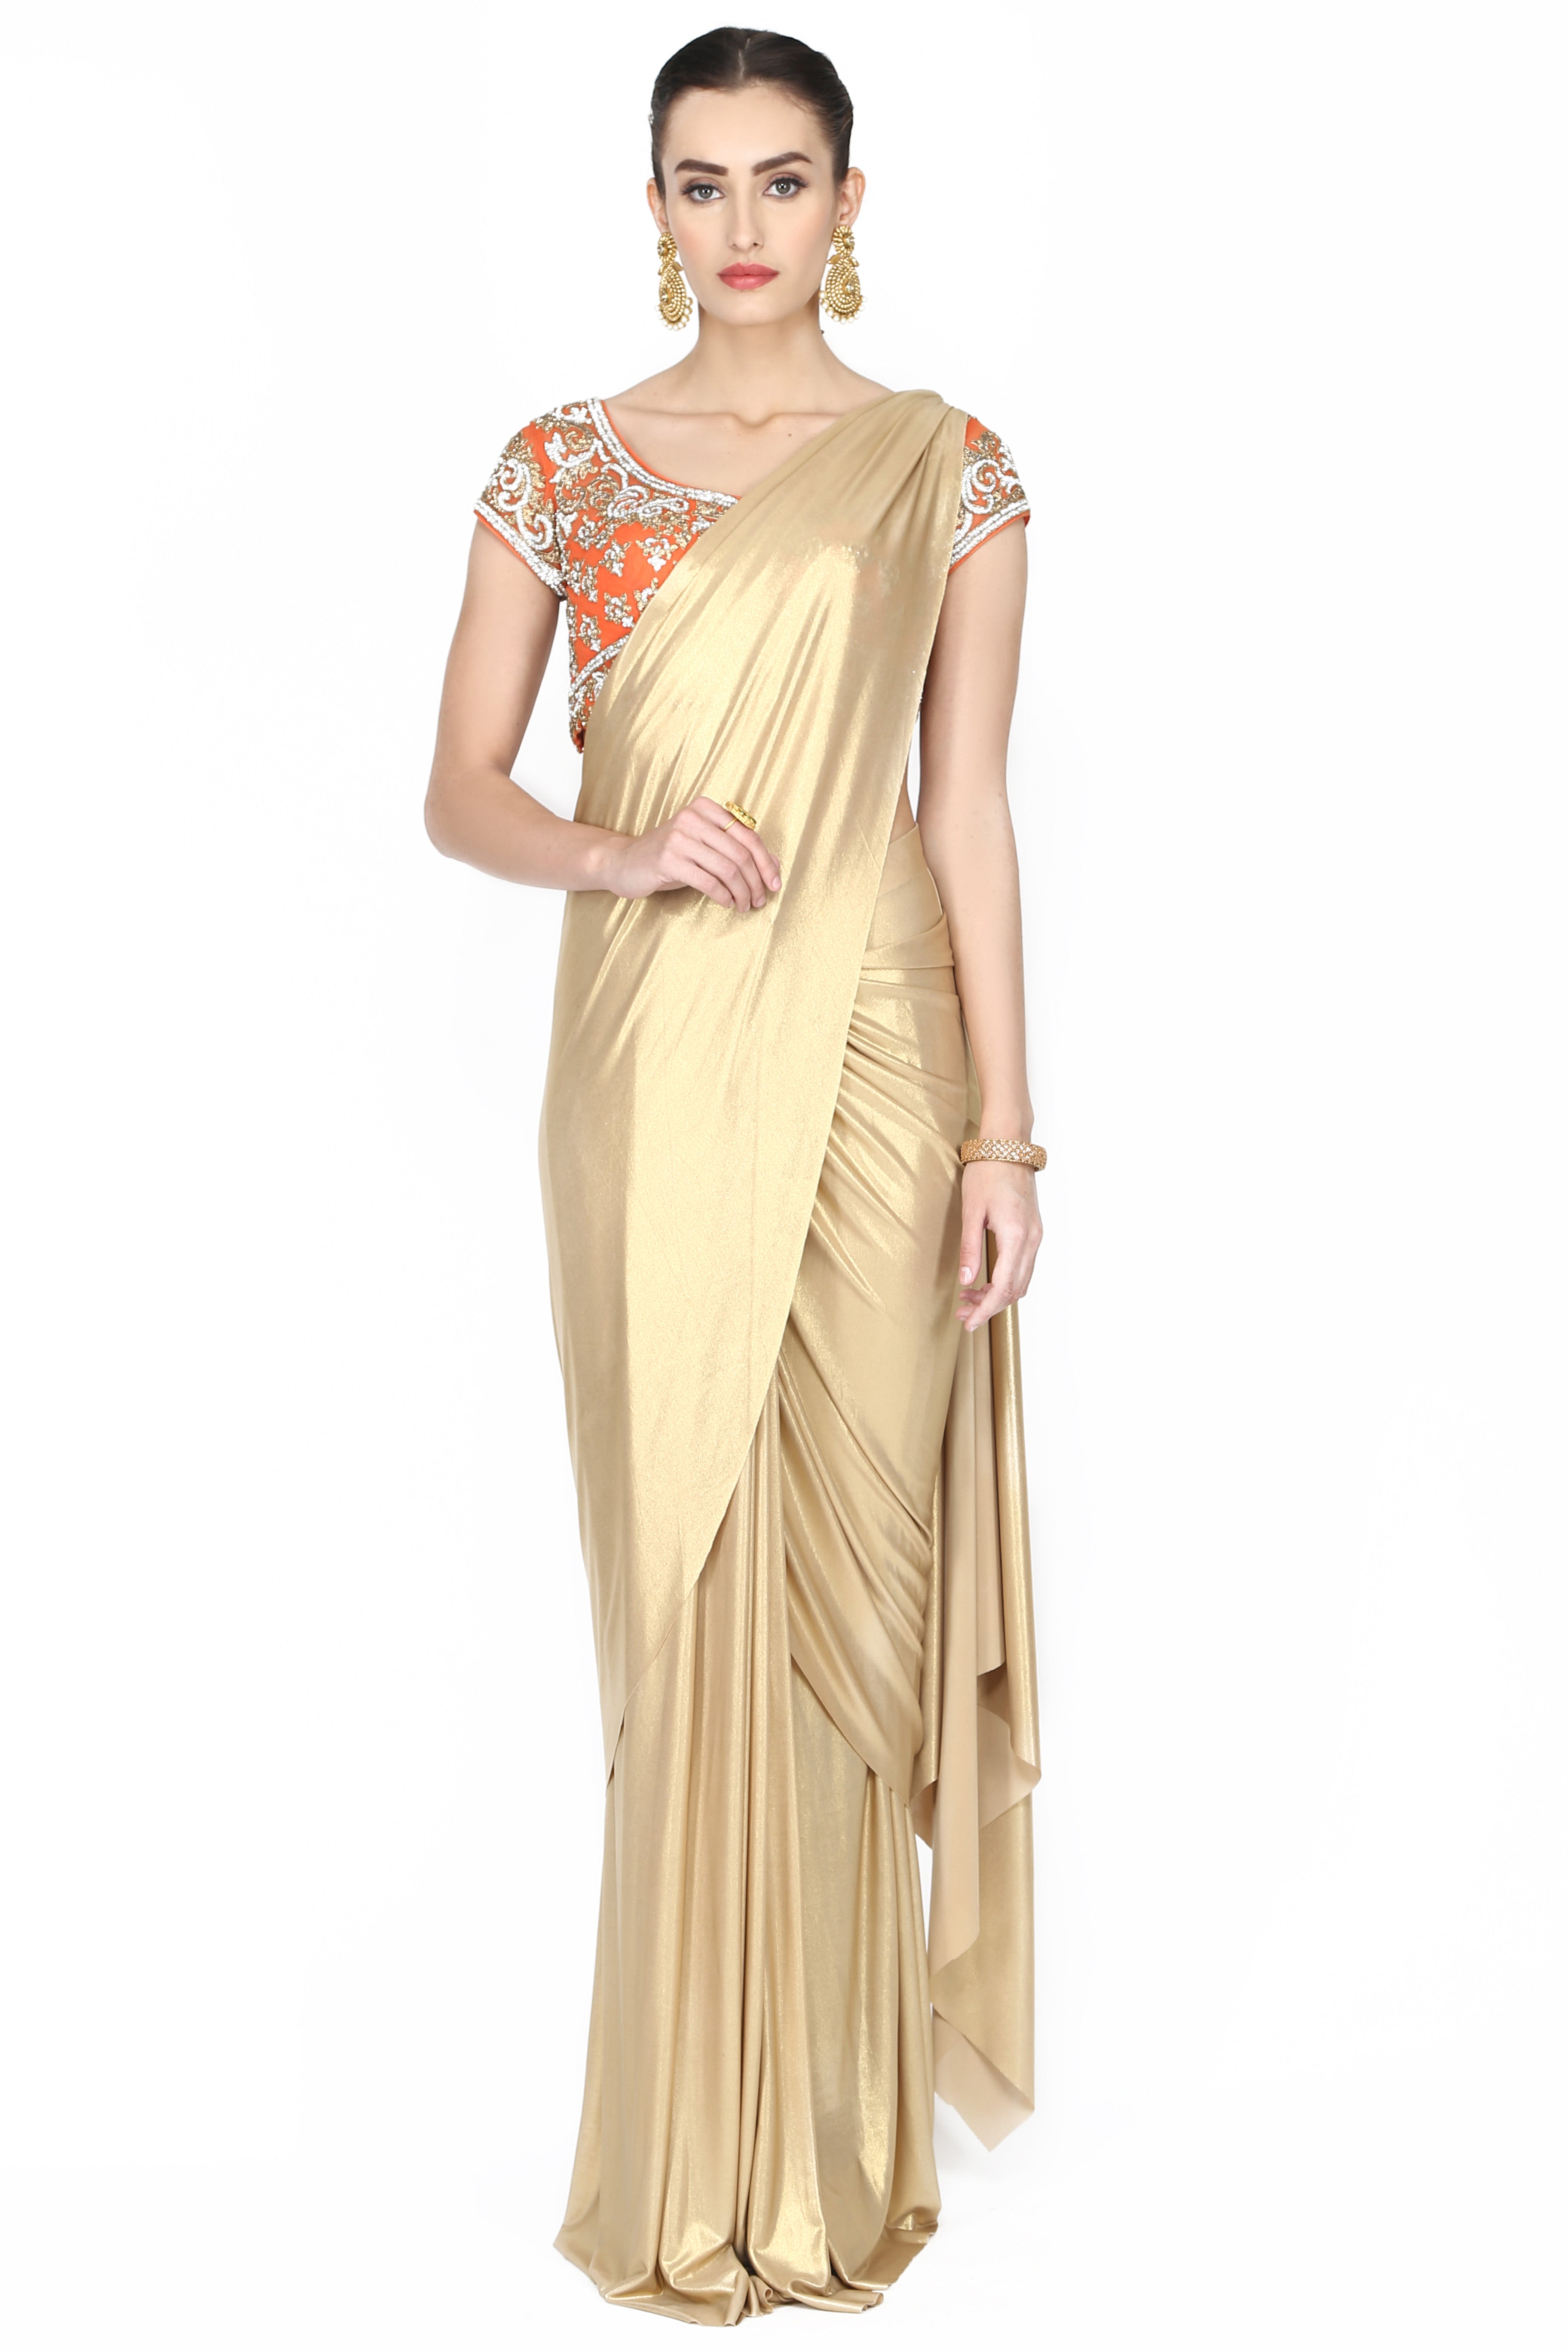 Ivory And Golden Sequin Saree - Quench A Thirst - East Boutique